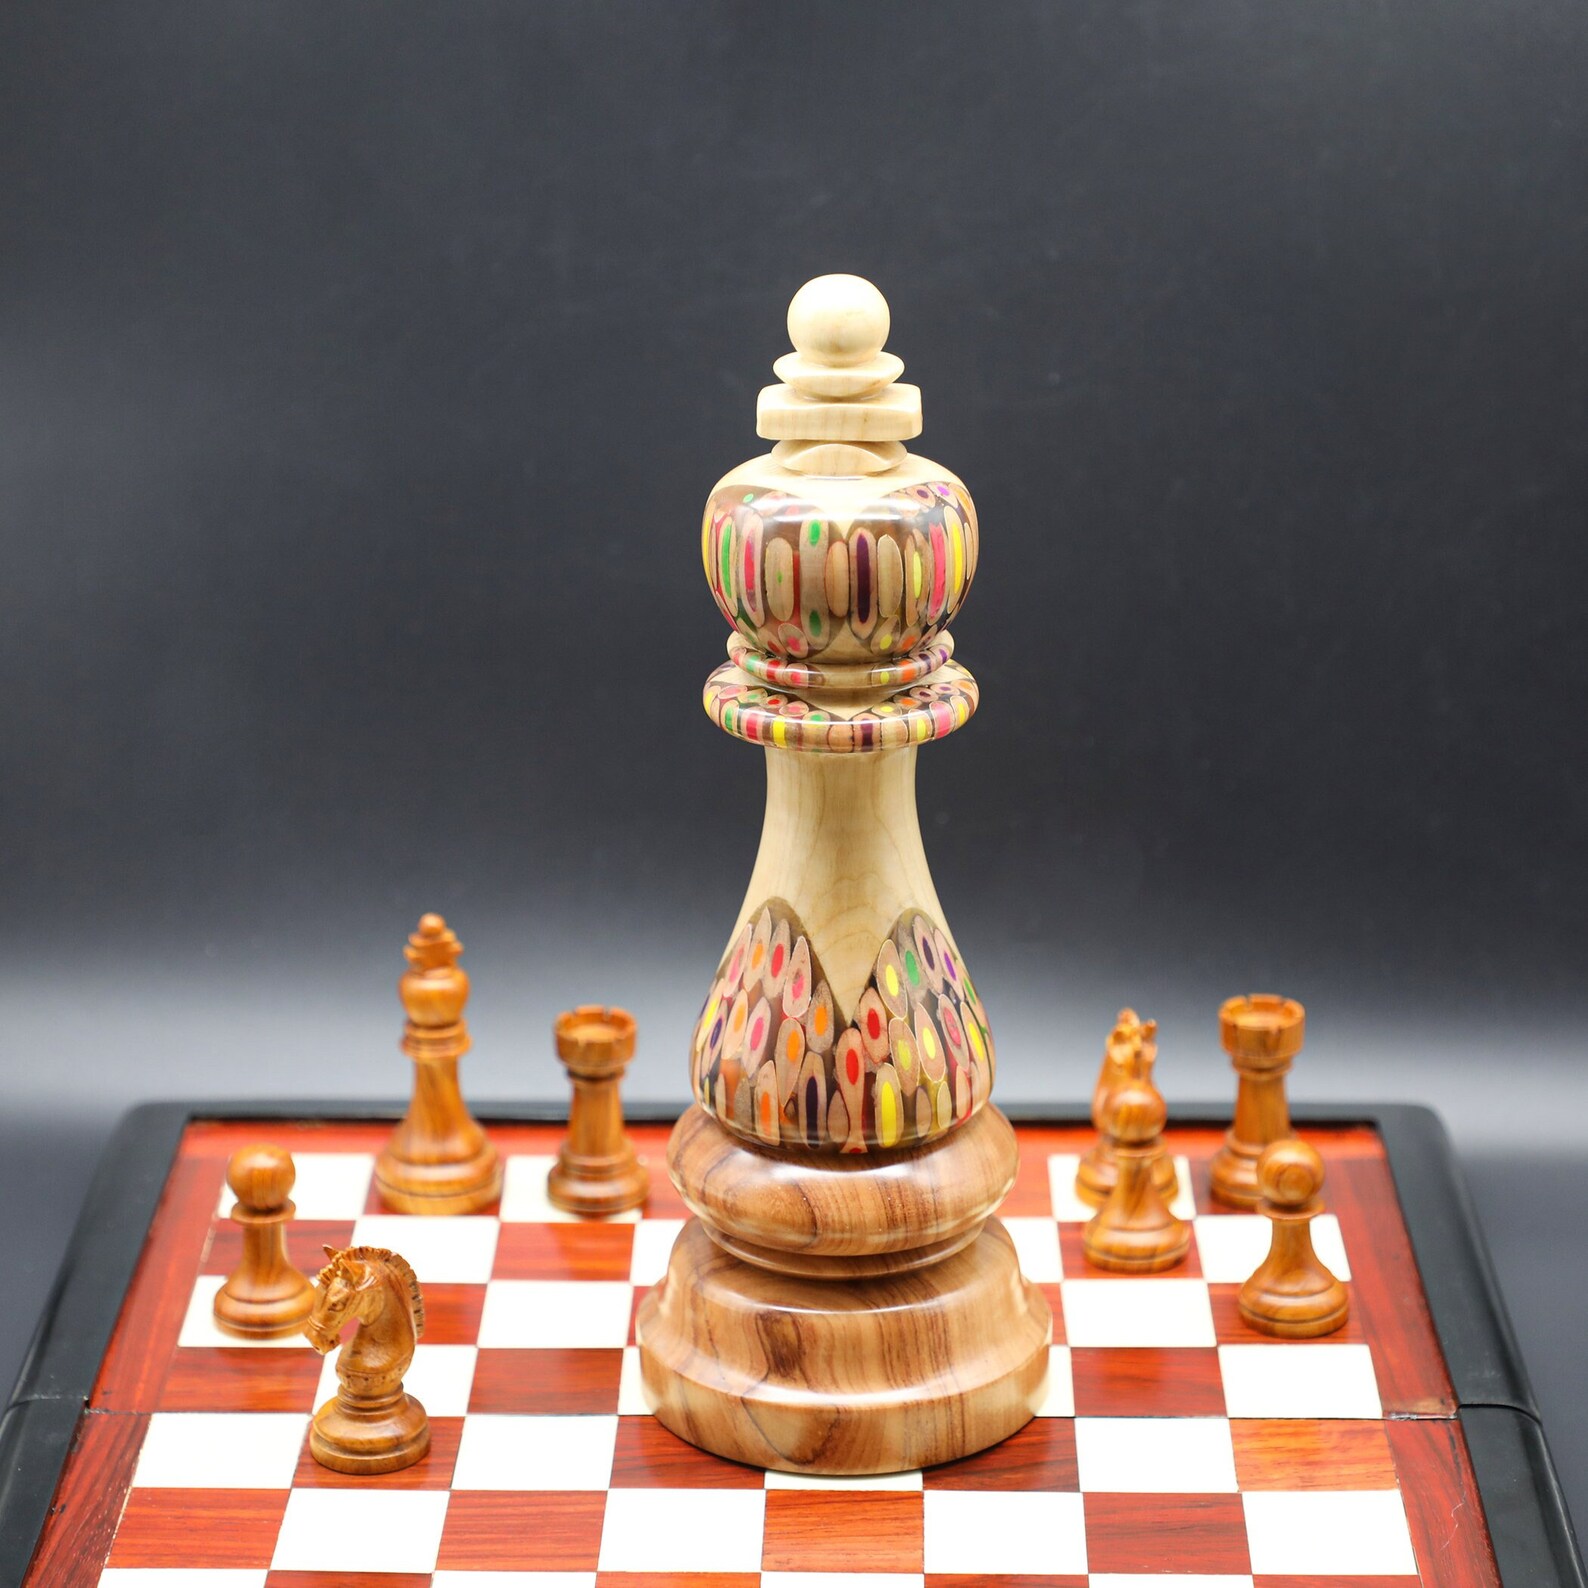 Giant Ornamental Knight - Deluxe Serial of Chess Piece for Decor - Henry  Chess Sets